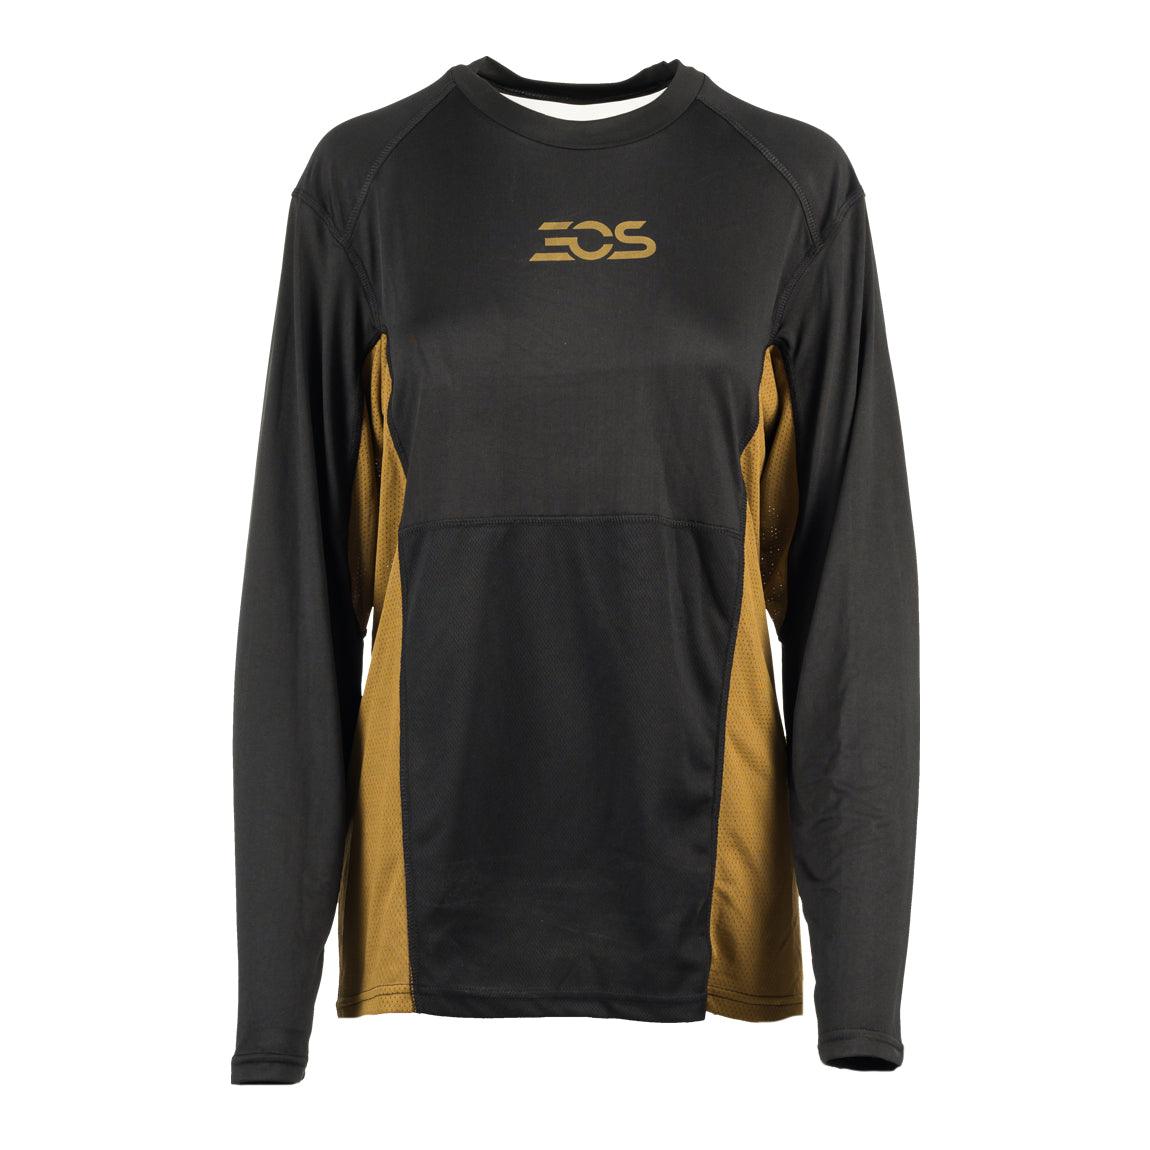 EOS 50 Girl's Baselayer Fitted Shirt - Junior - Sports Excellence